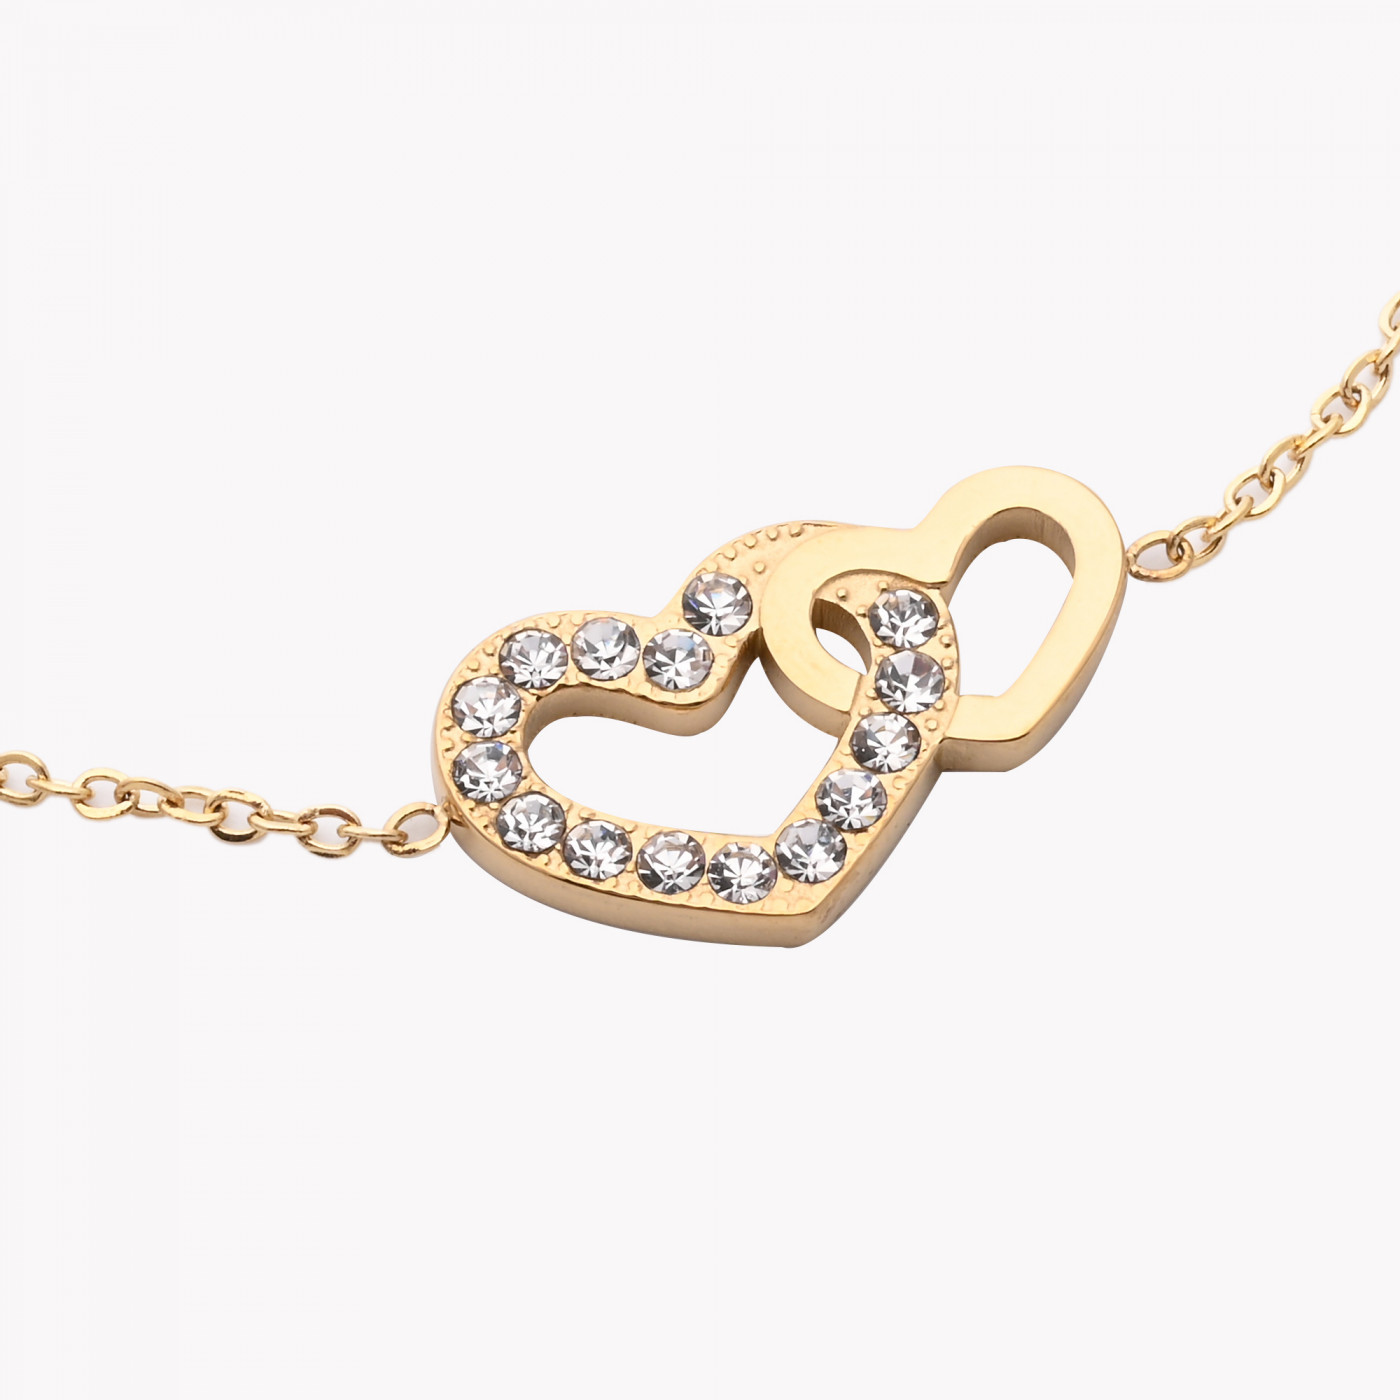 Swarovski Women's Necklaces with Heart Pendants | Stylicy